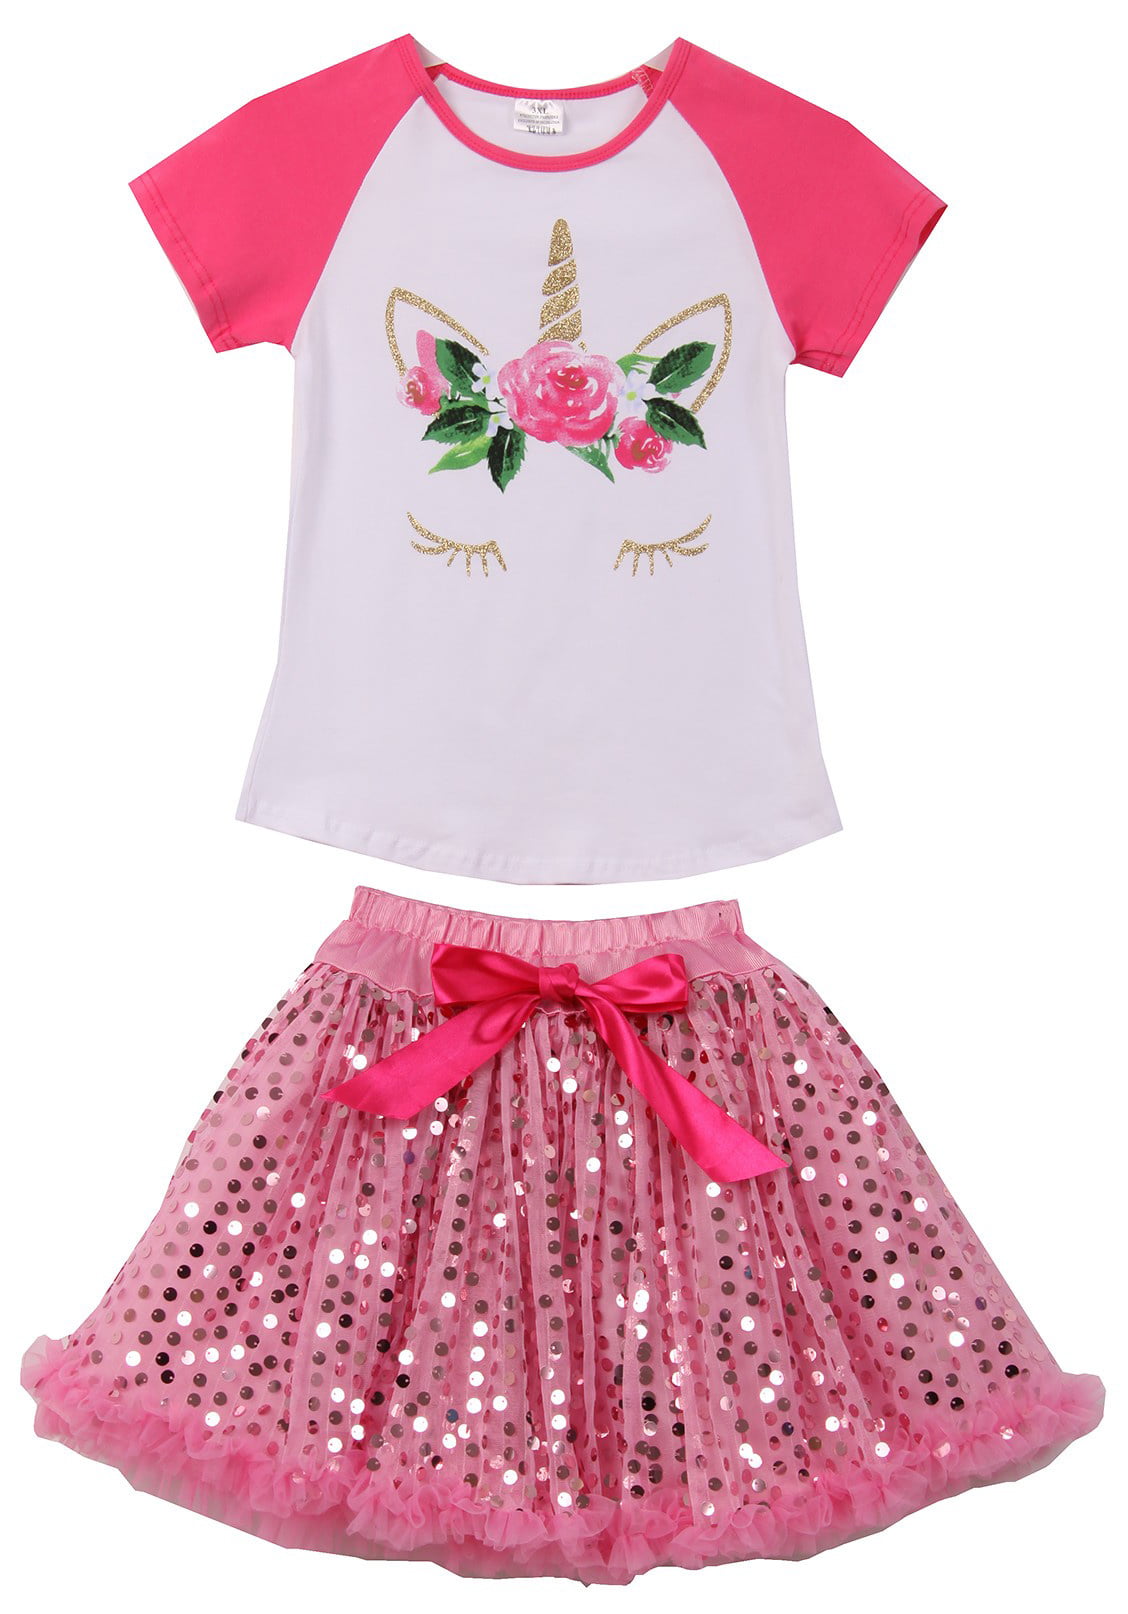 Baby frilly skirt t shirt top summer COTTON girl coral pink